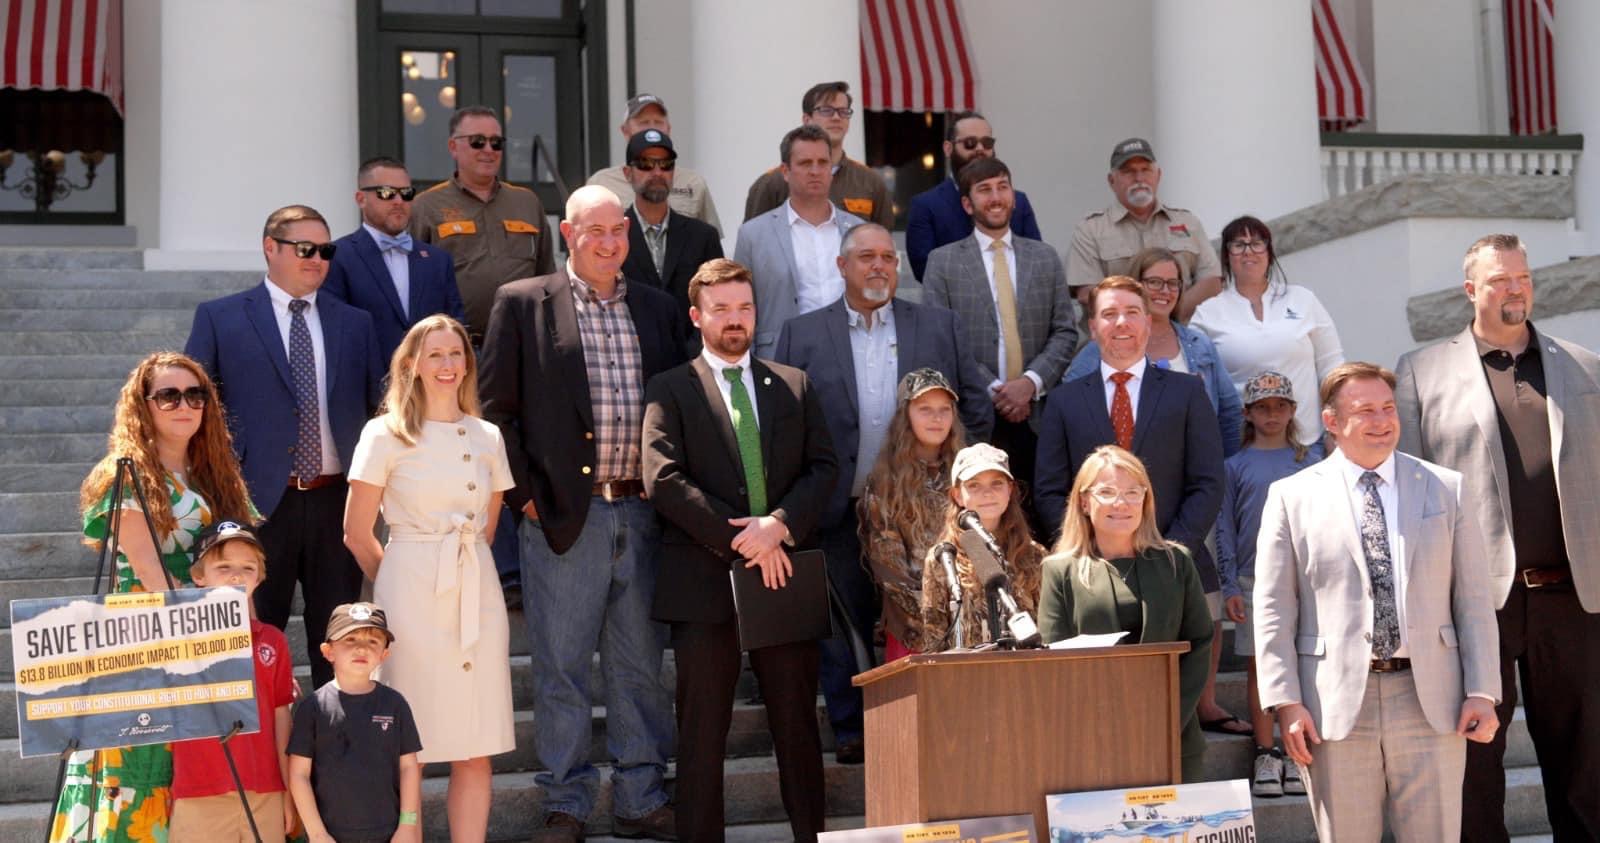 Florida regional director for Delta Waterfowl, Stacy Whittum, among the many hunting and conservation advocates present at the Florida Capitol in support of the legislation.